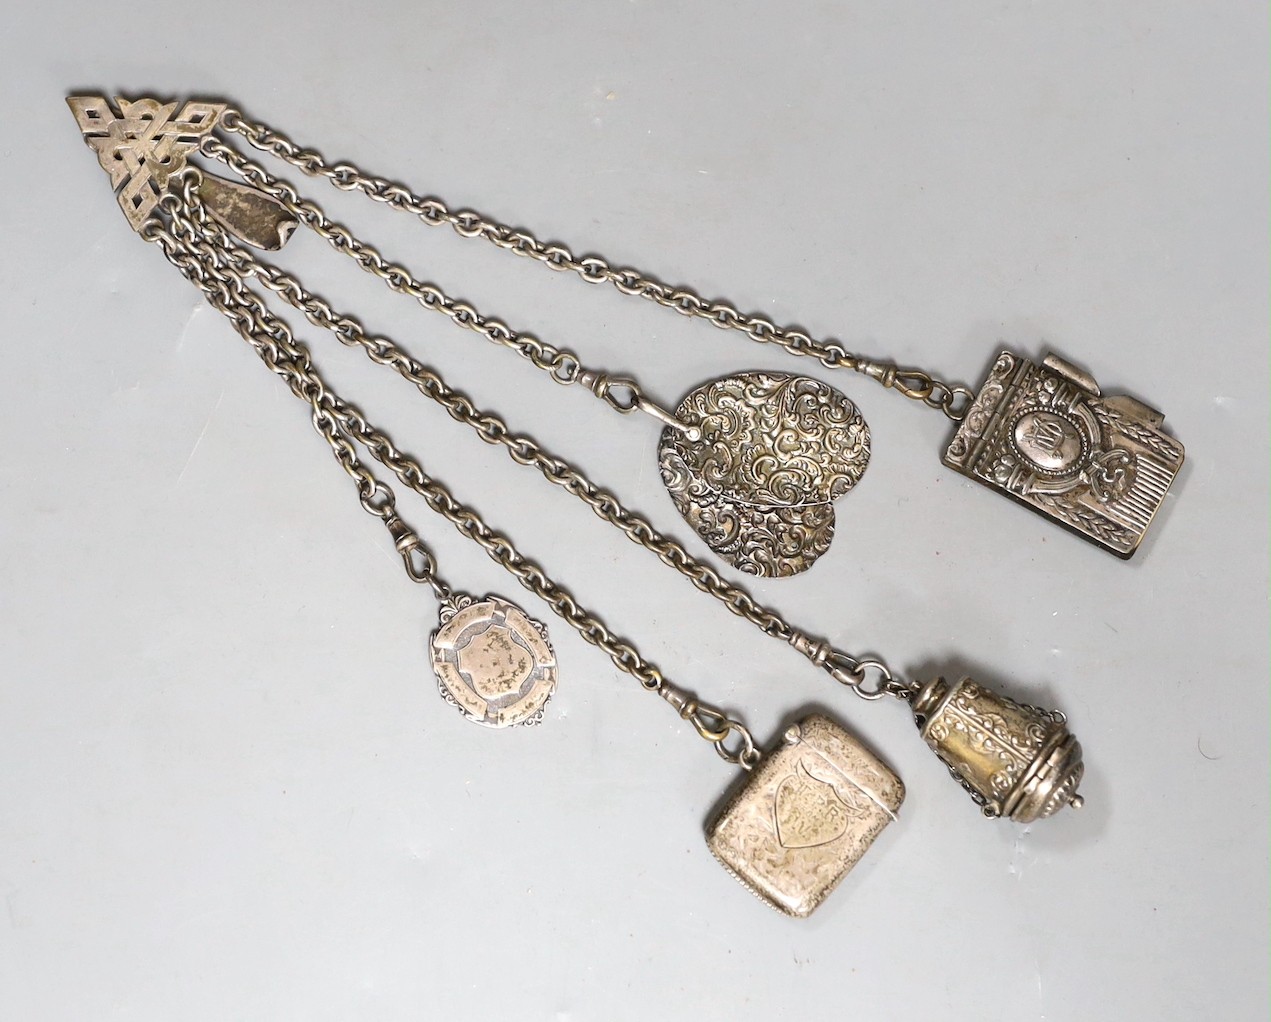 A 19th century plated five chain chatelaine, with a thimble holder, a silver Vesta and a medallion, a note book and two oval metal panels